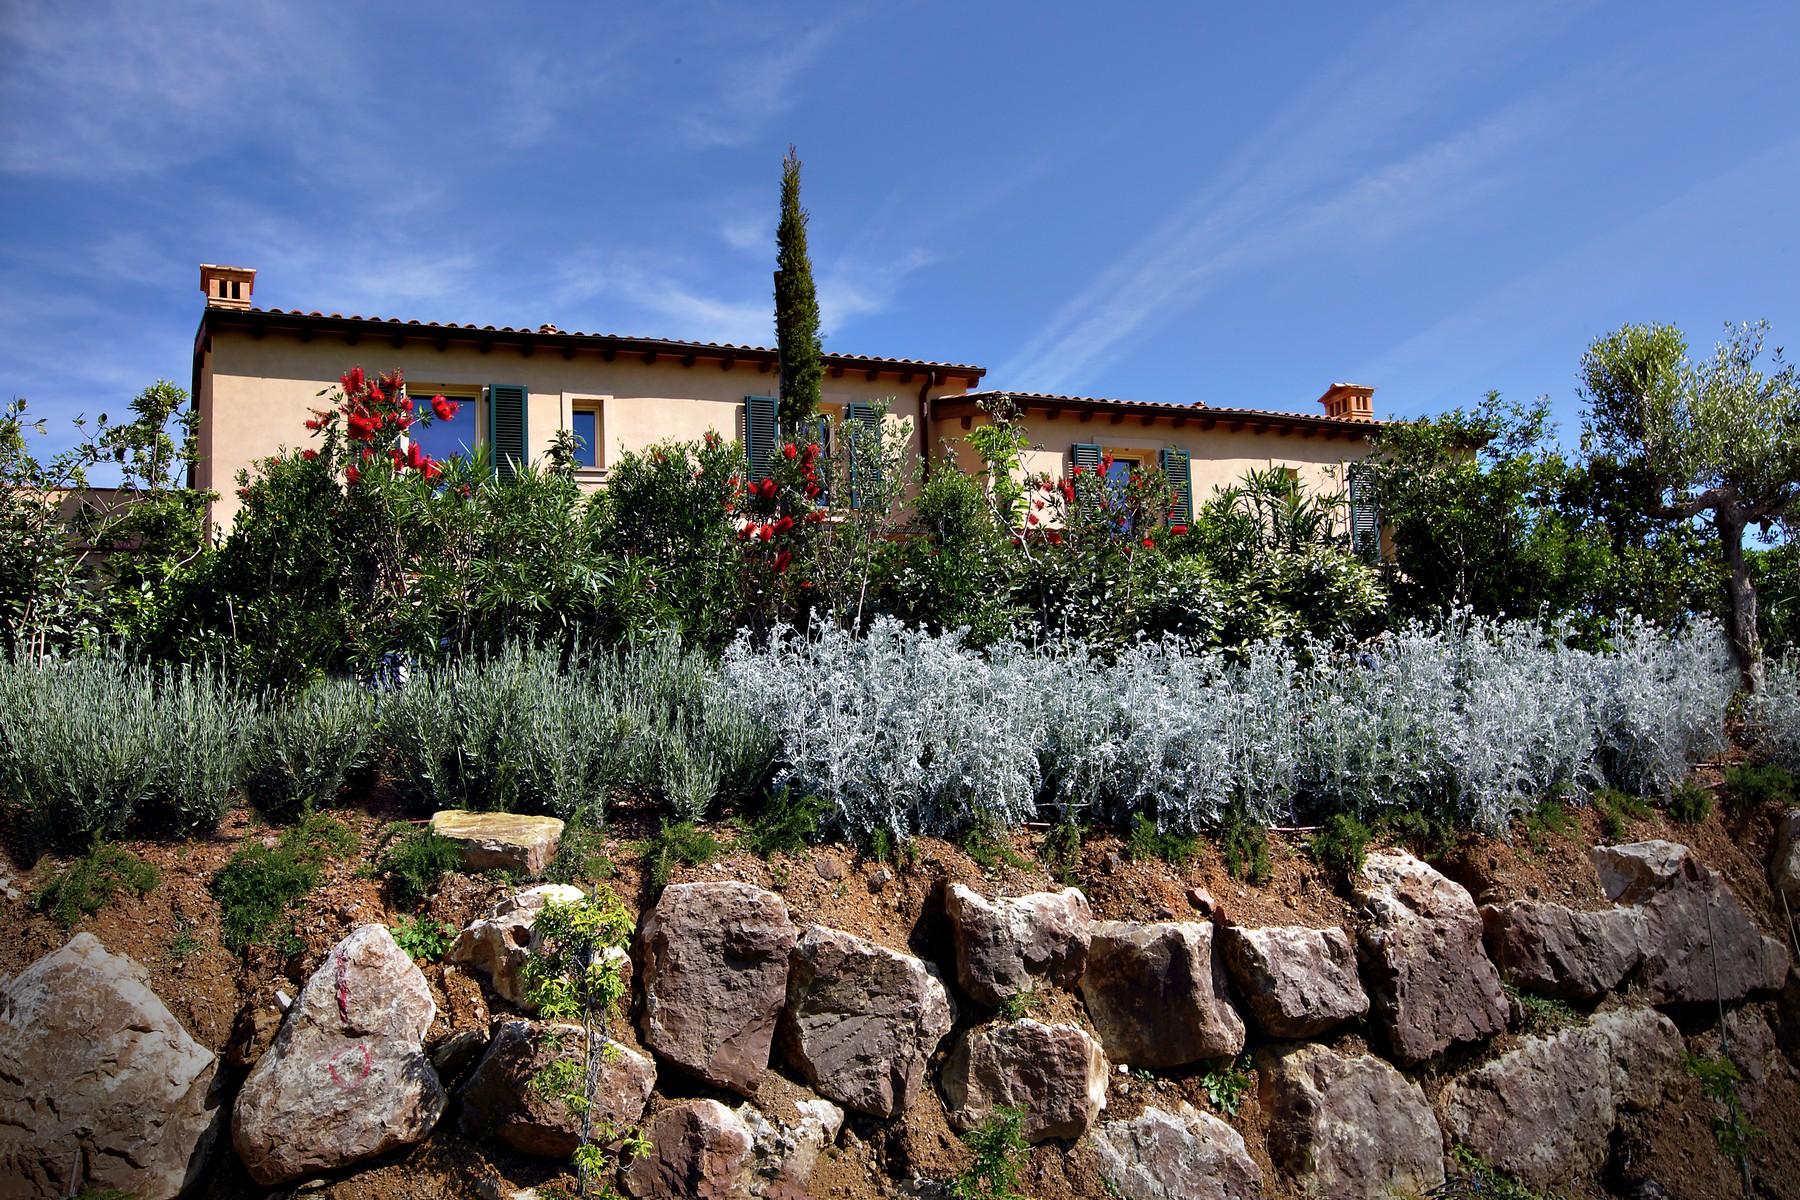 New farmhouses in the Tuscan hills - 4